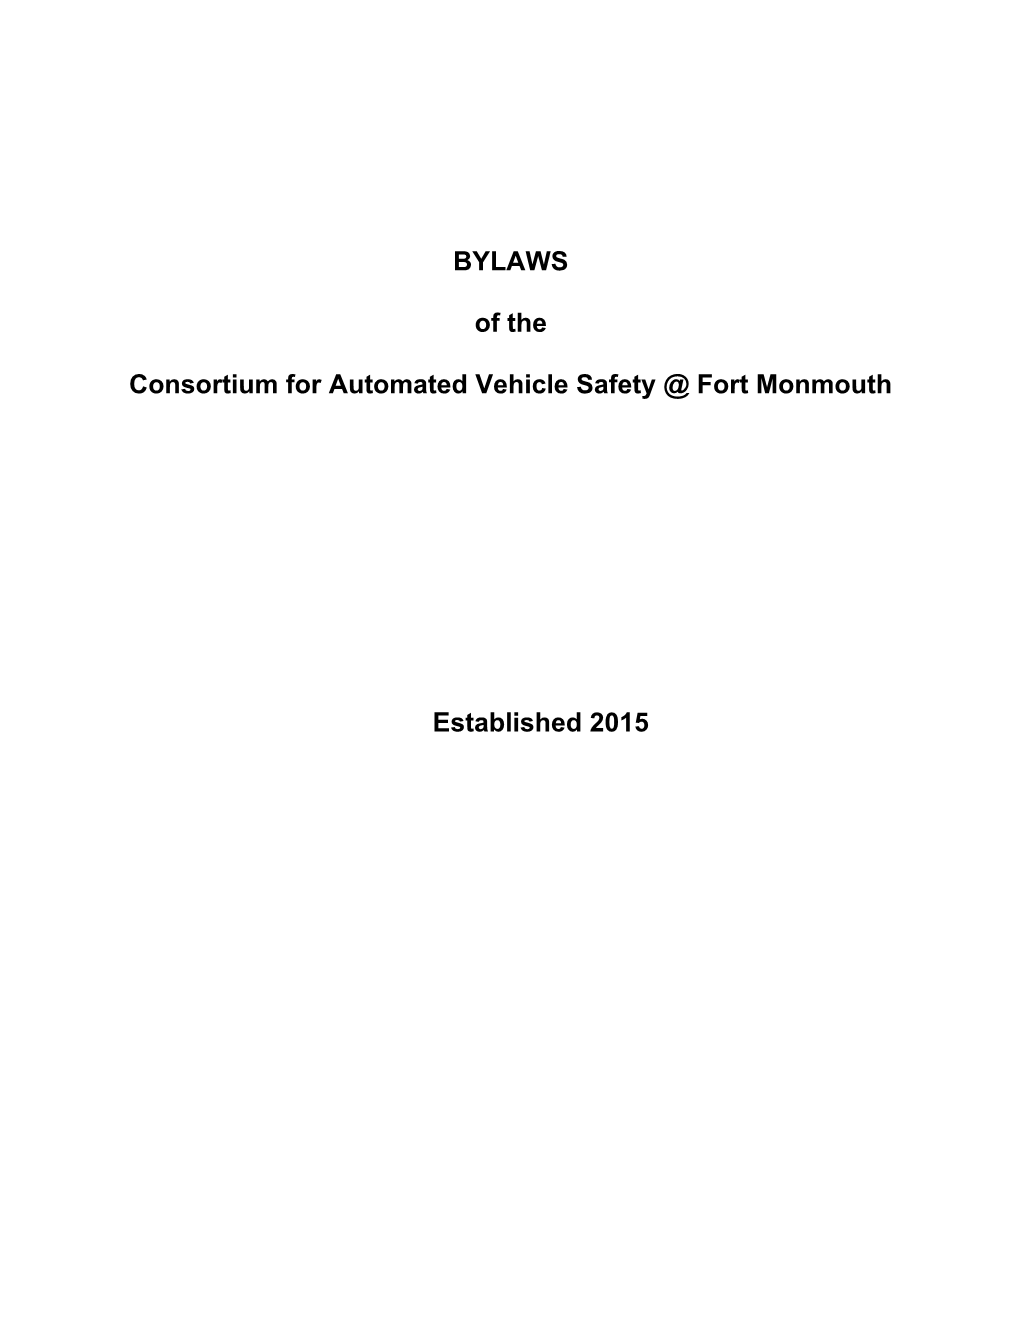 Bylaws of Theconsortium for Automated Vehicle Safety Fort Monmouth